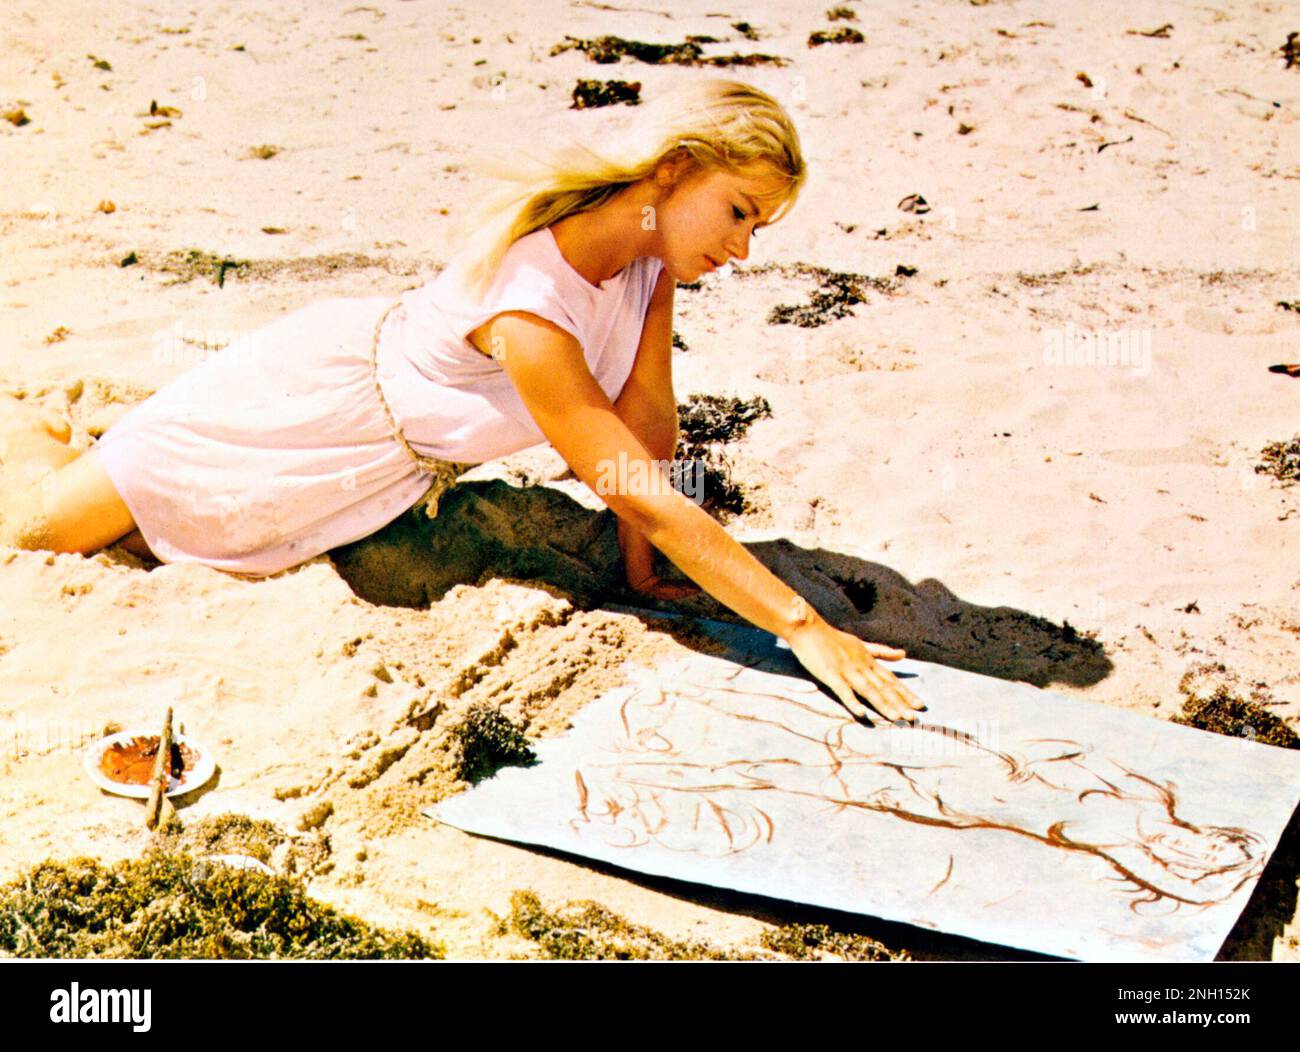 HELEN MIRREN in AGE OF CONSENT (1969), directed by MICHAEL POWELL. Credit: COLUMBIA/NAUTILUS / Album Stock Photo